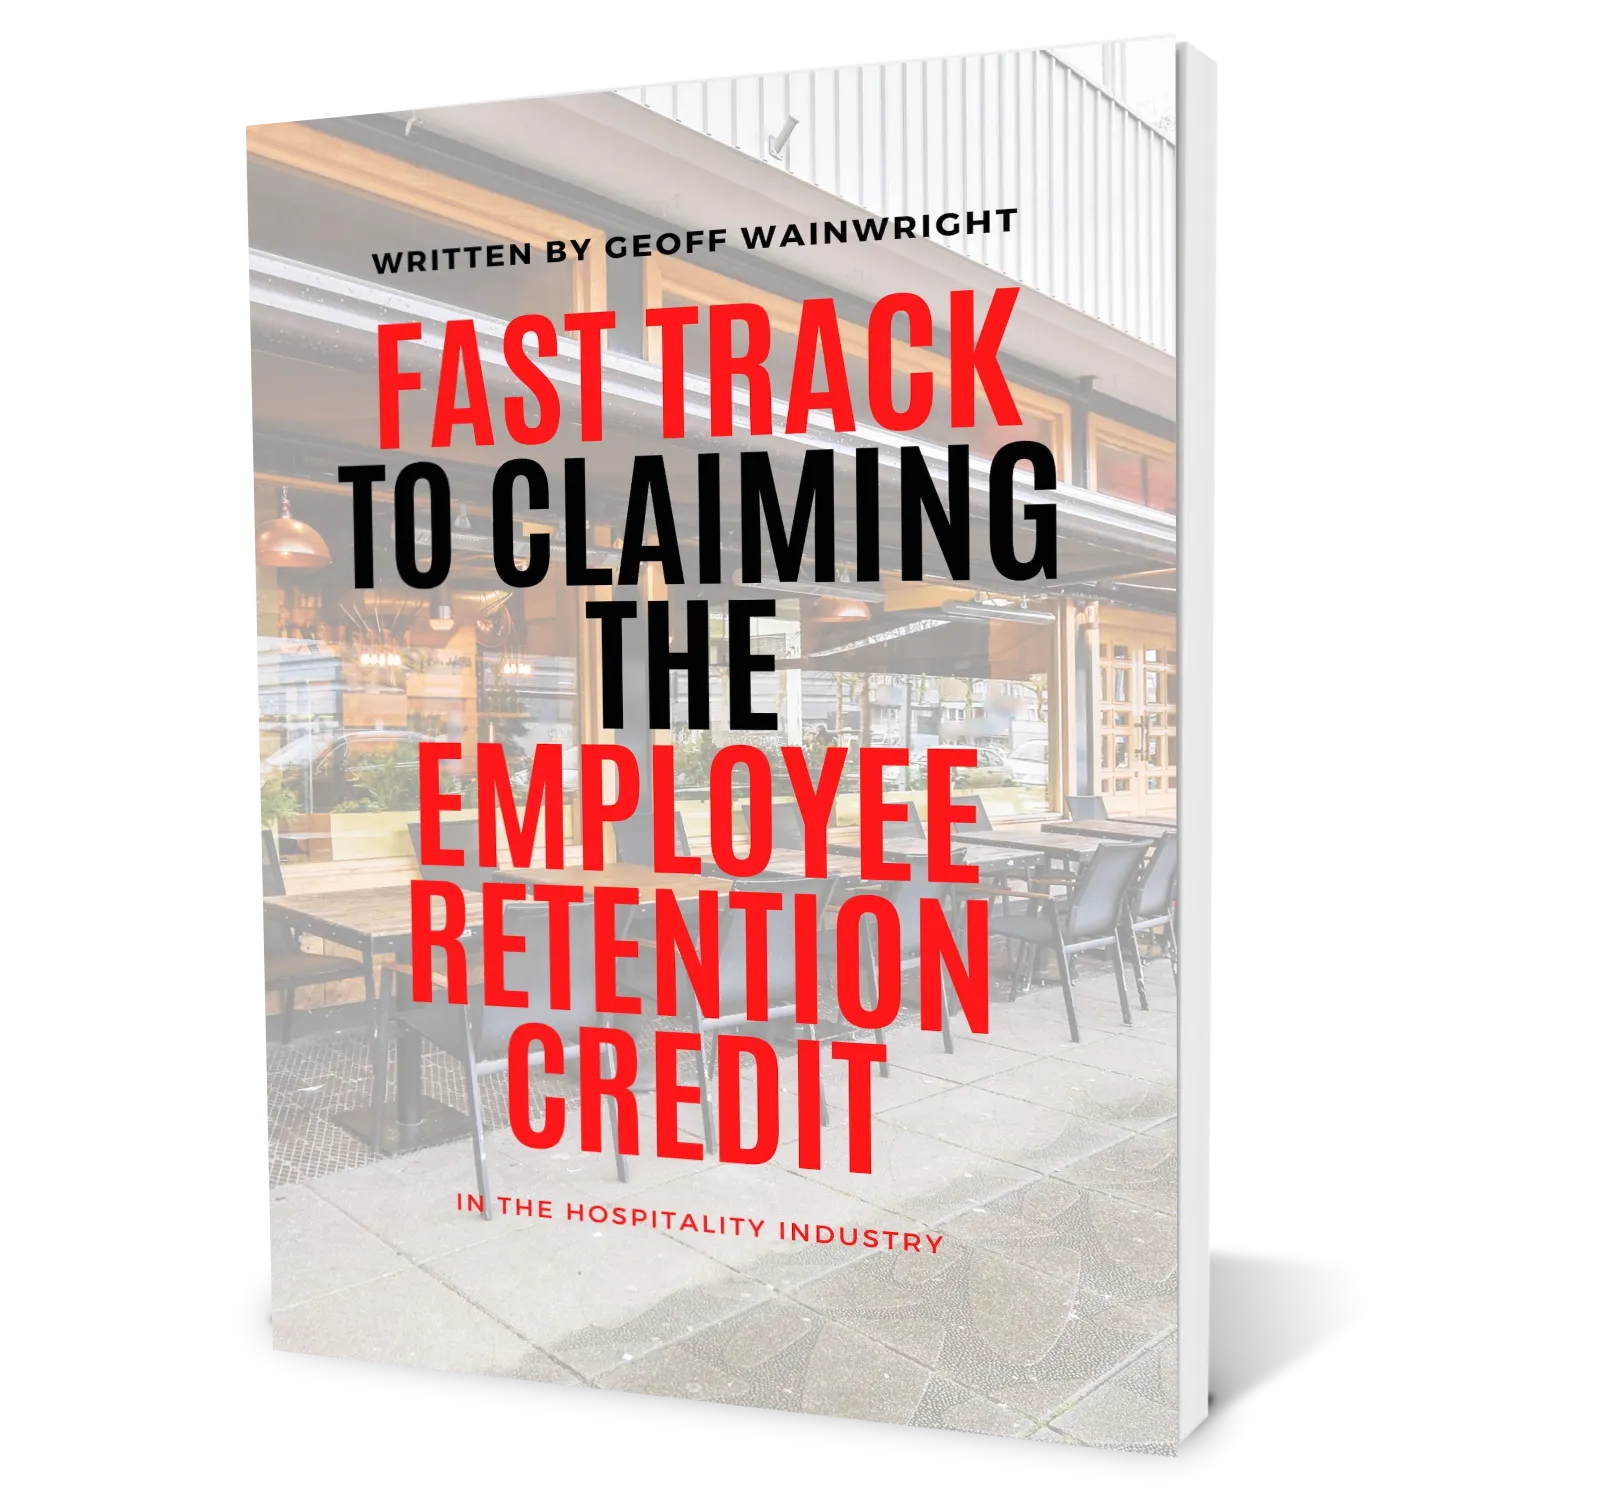 Fast Track Employee Retention Credit for Hospitality Industry